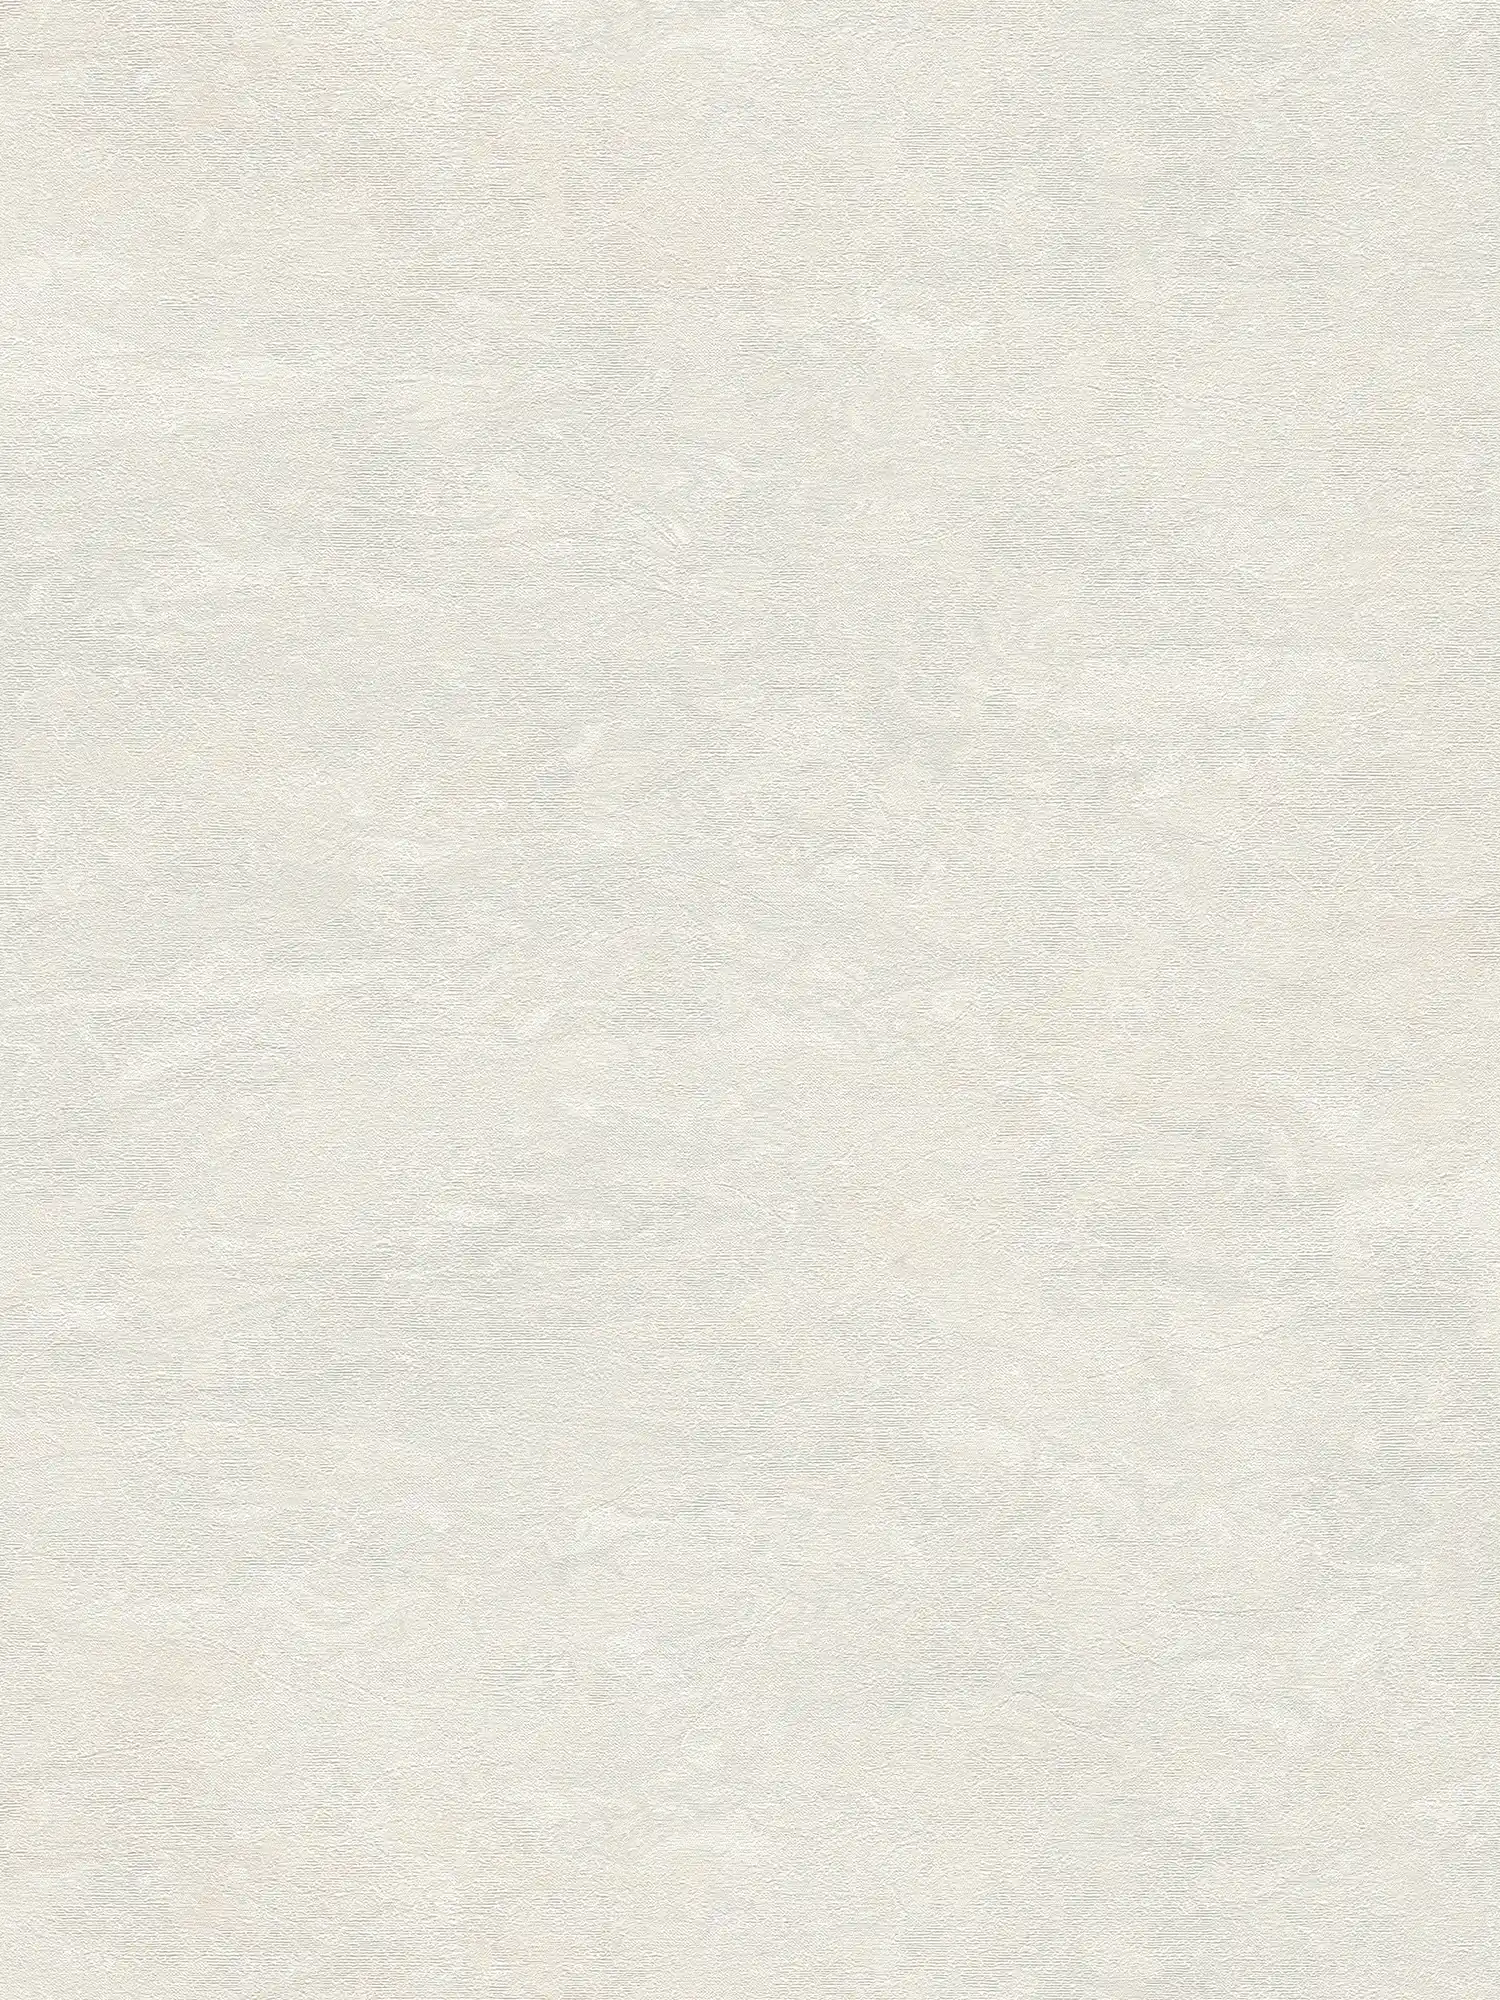 Cream white wallpaper with subtle marbling - white, grey
